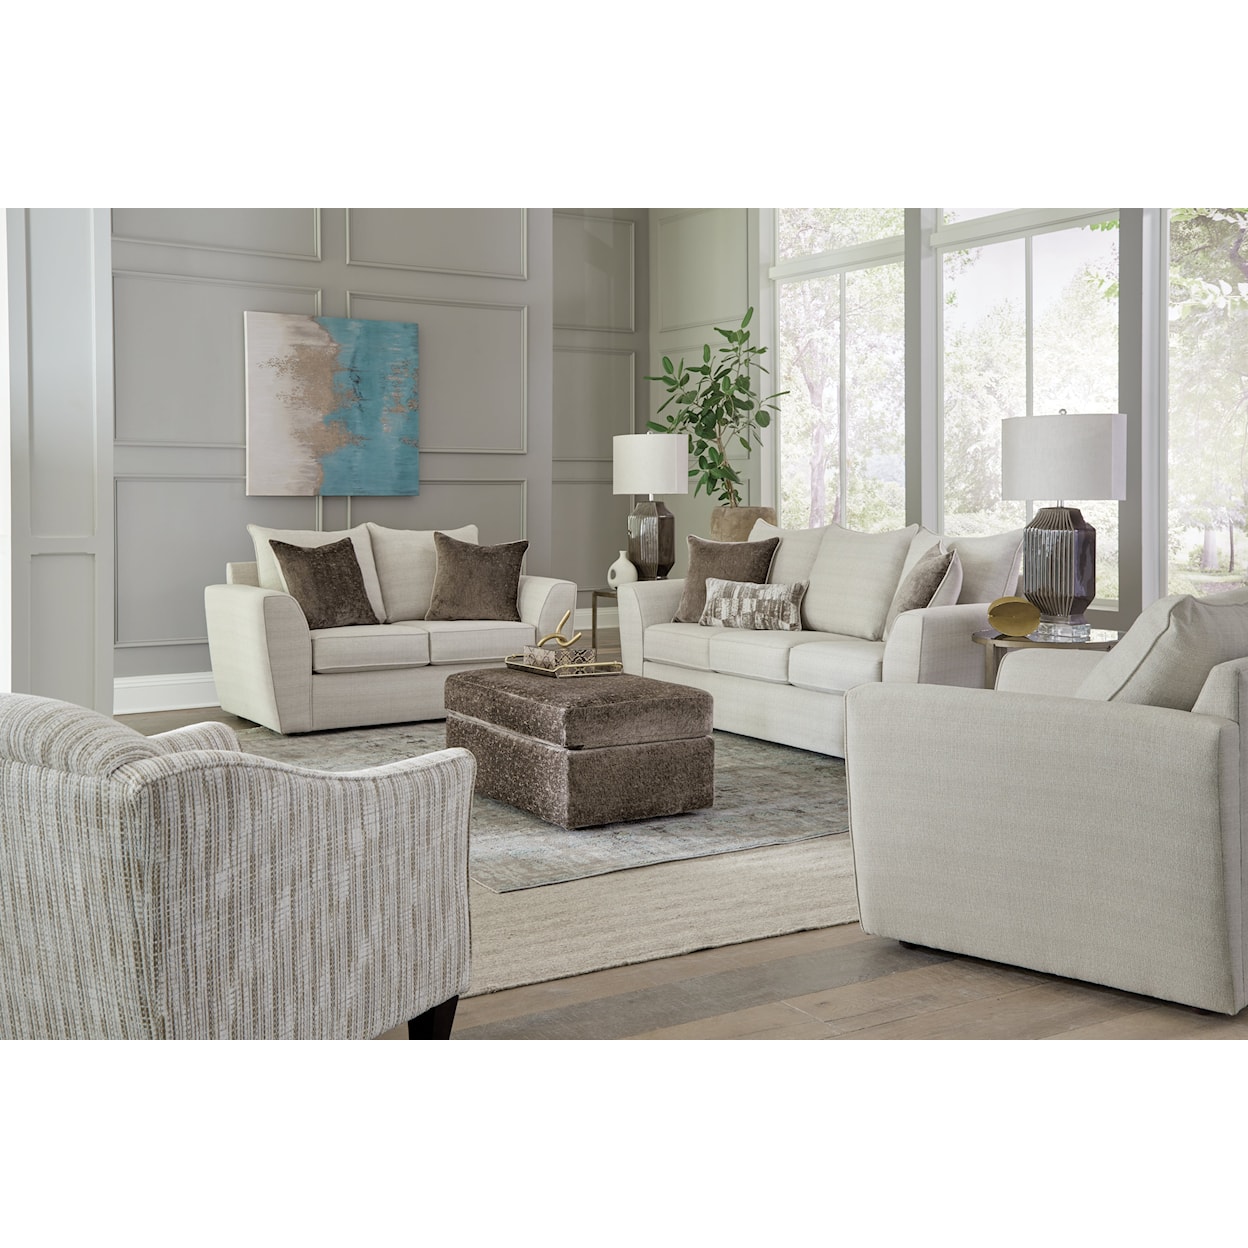 Behold Home BH1220 Winslow 5-Piece Living Room Set